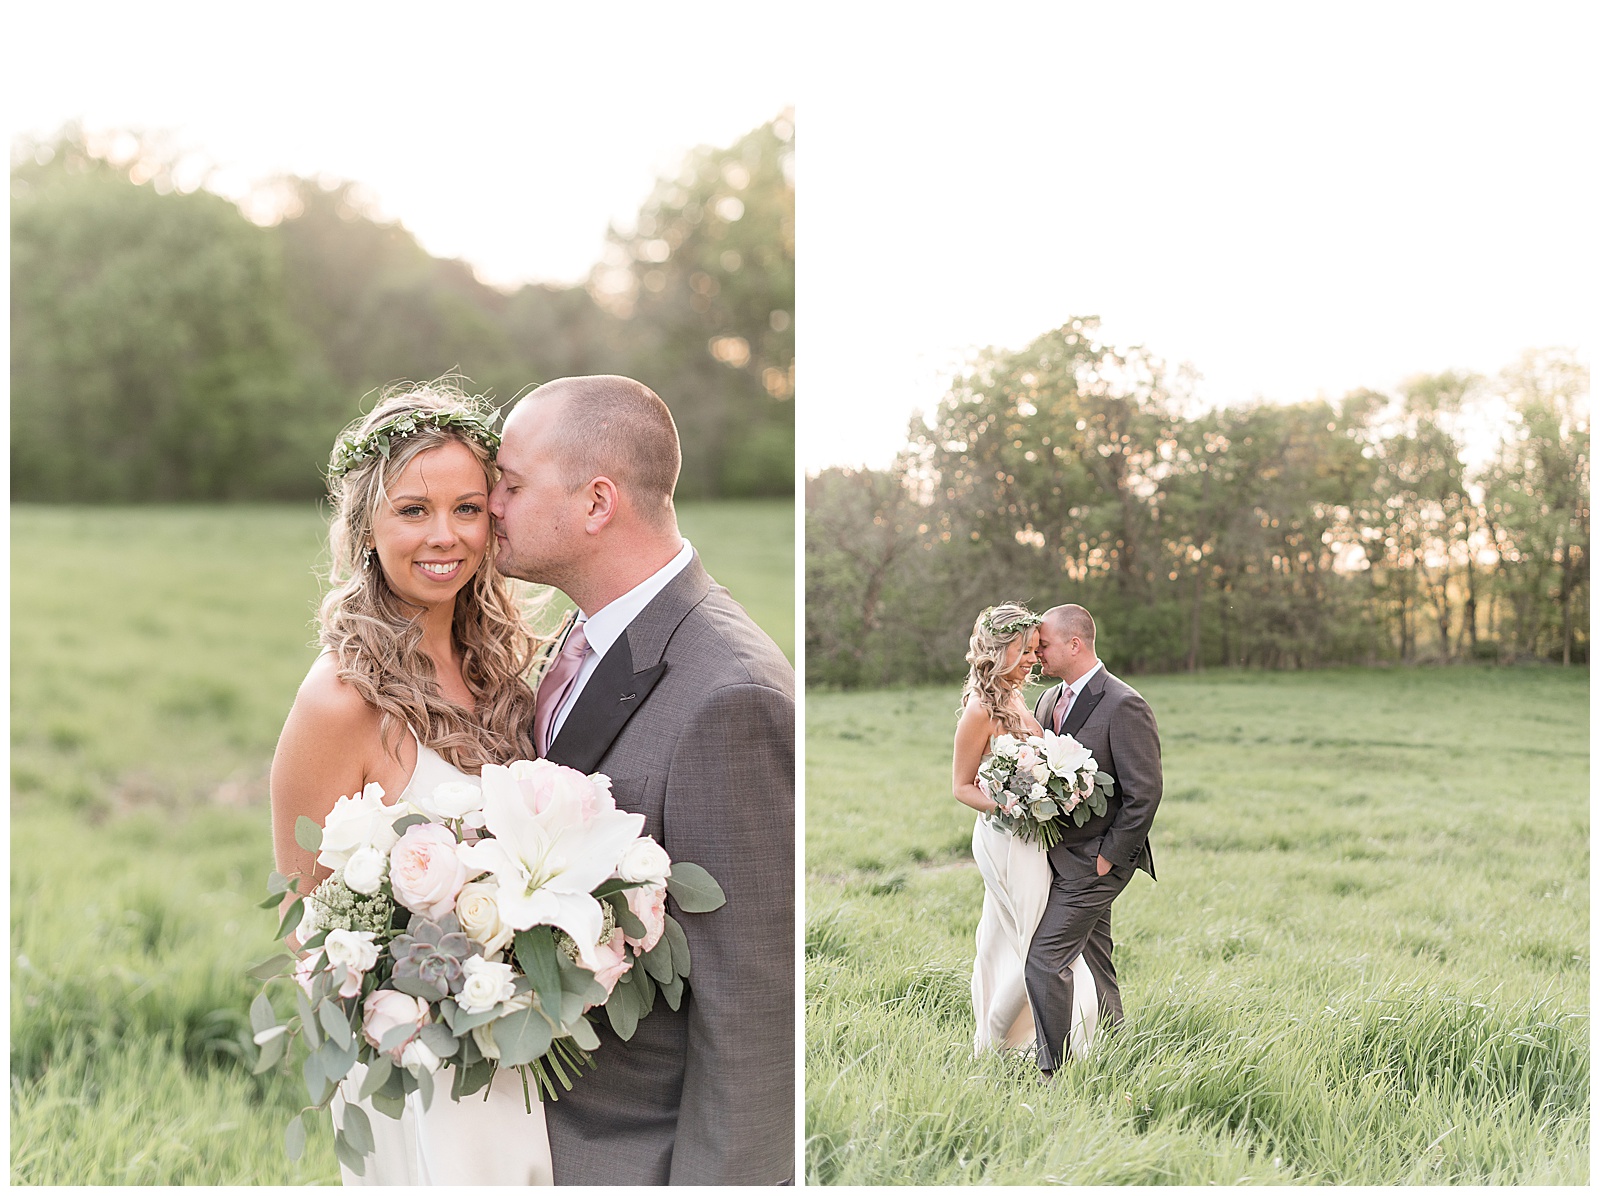 groom kisses bride and holds her tightly while standing in grassy field as sun sets behind them